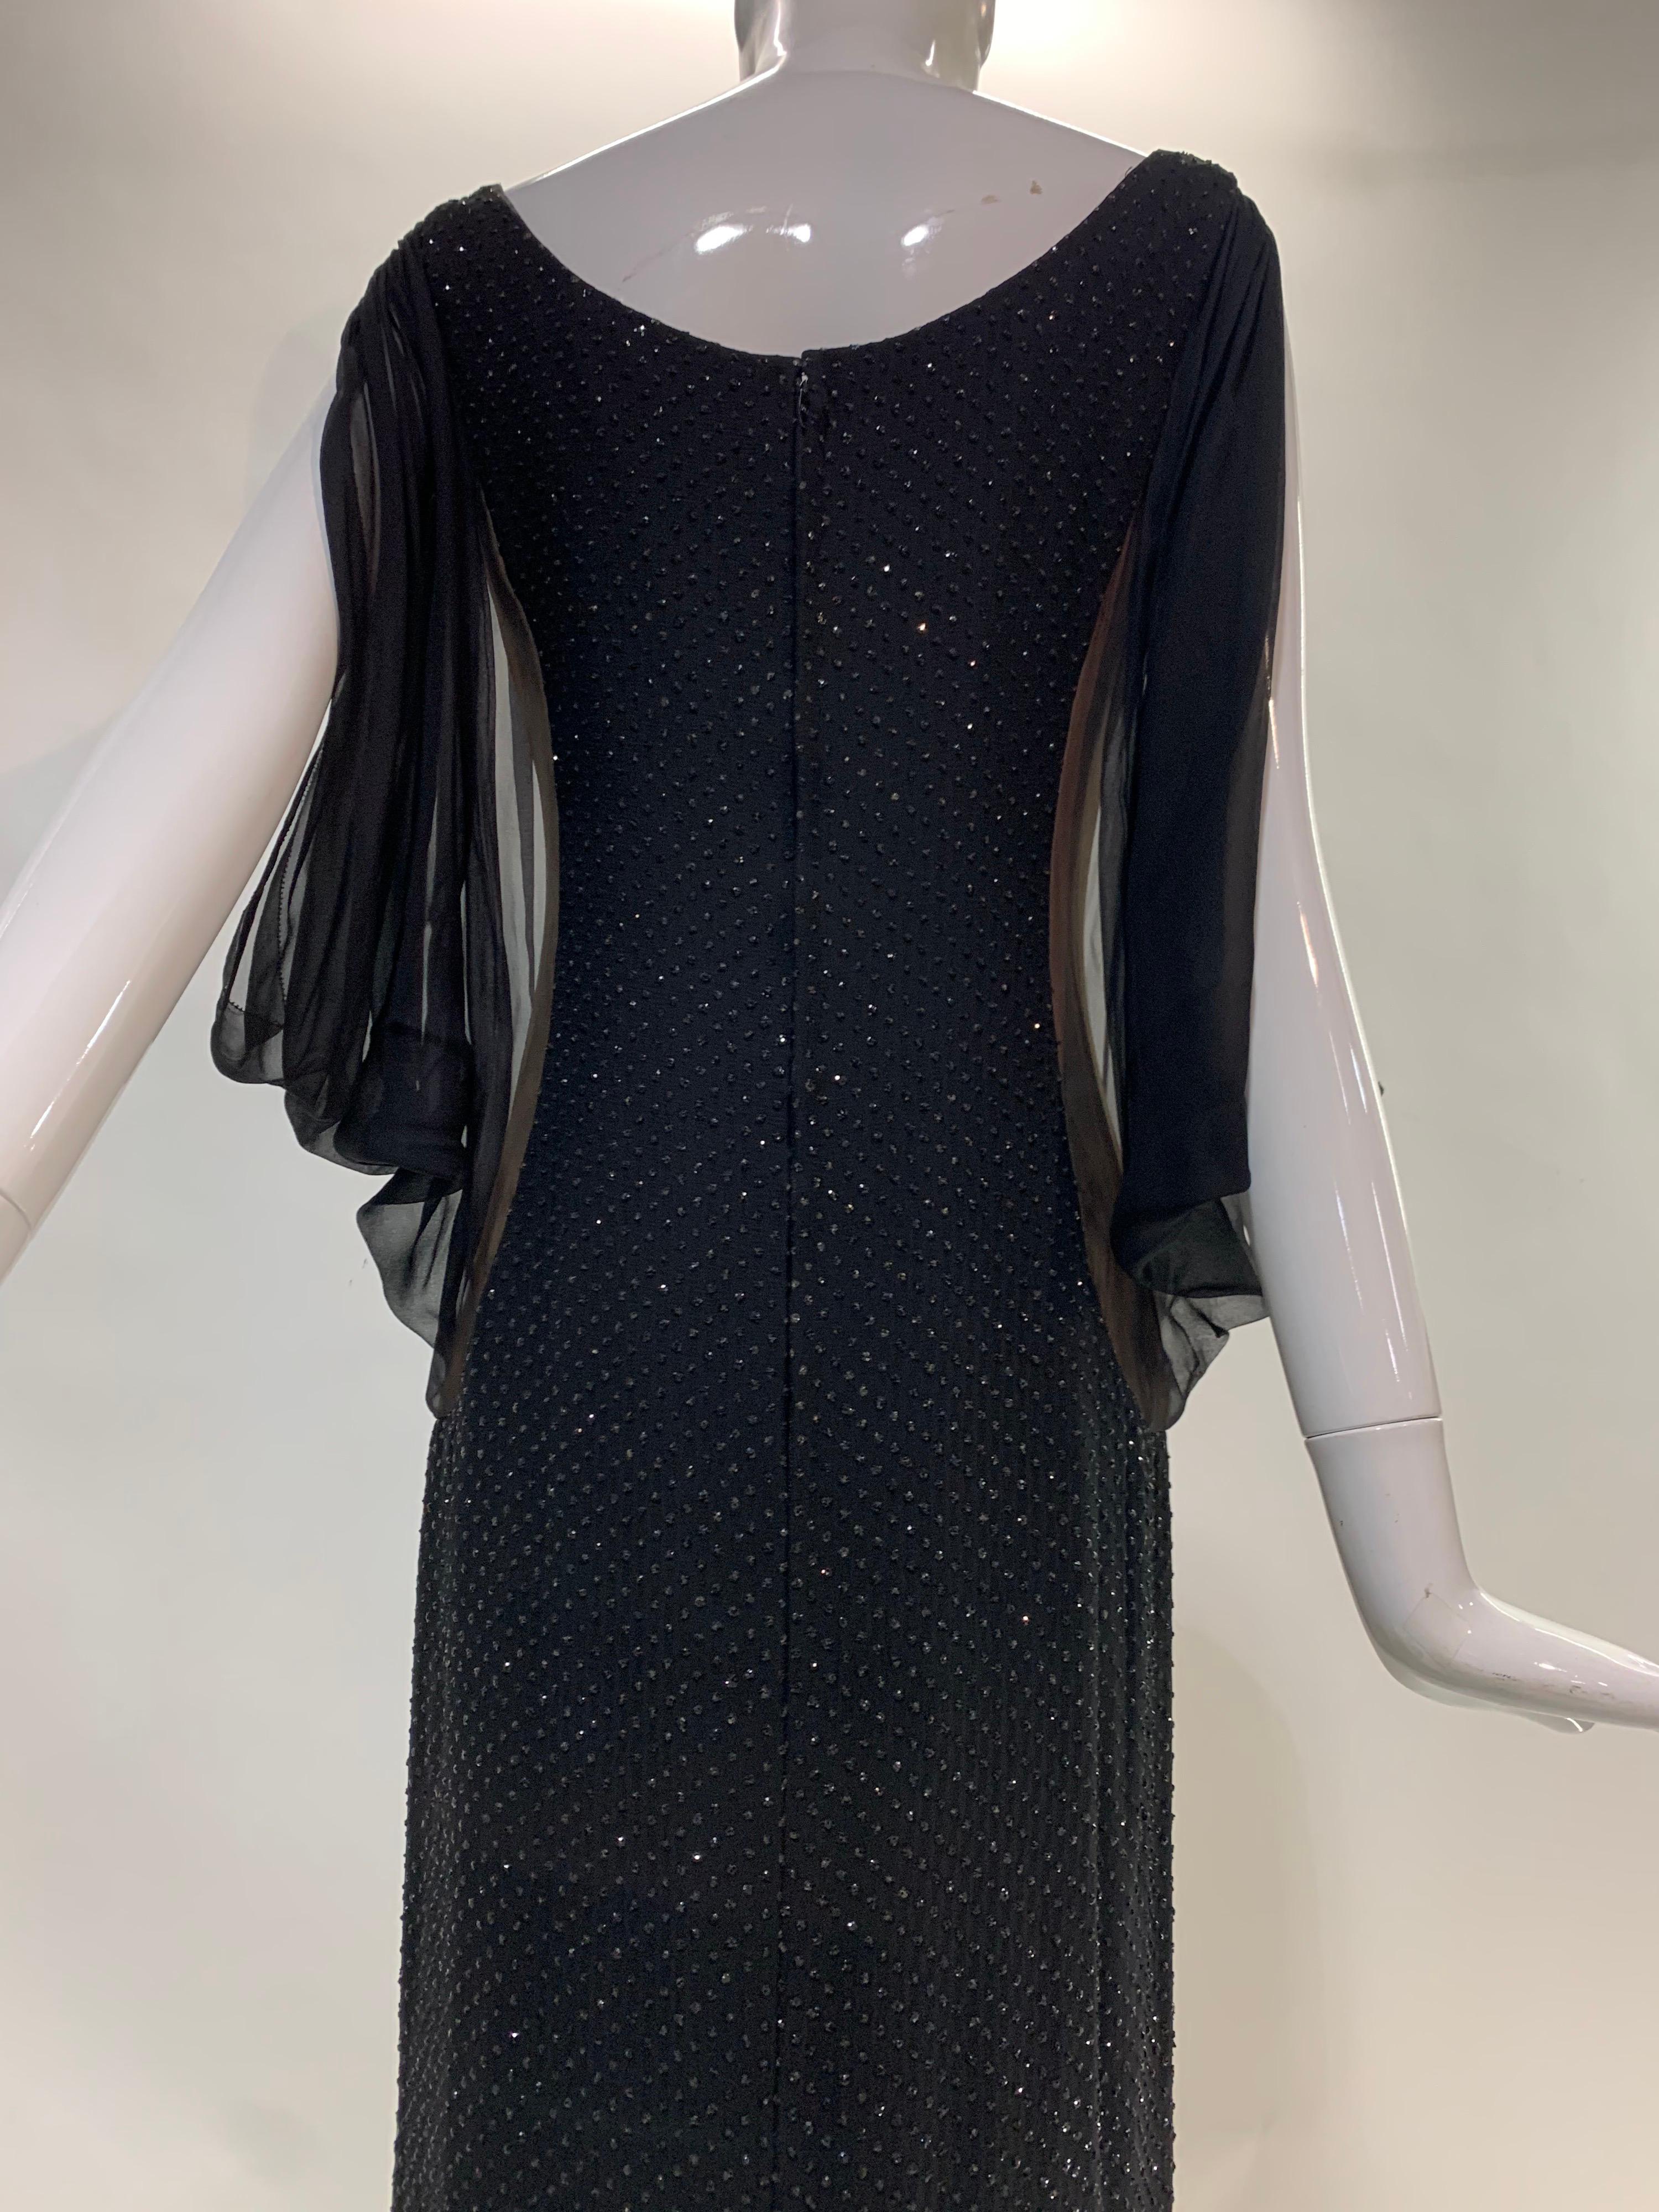 1960s Werle Glamorous Black Glittered Silk Chiffon Gown w/ Dramatic Sleeves For Sale 3